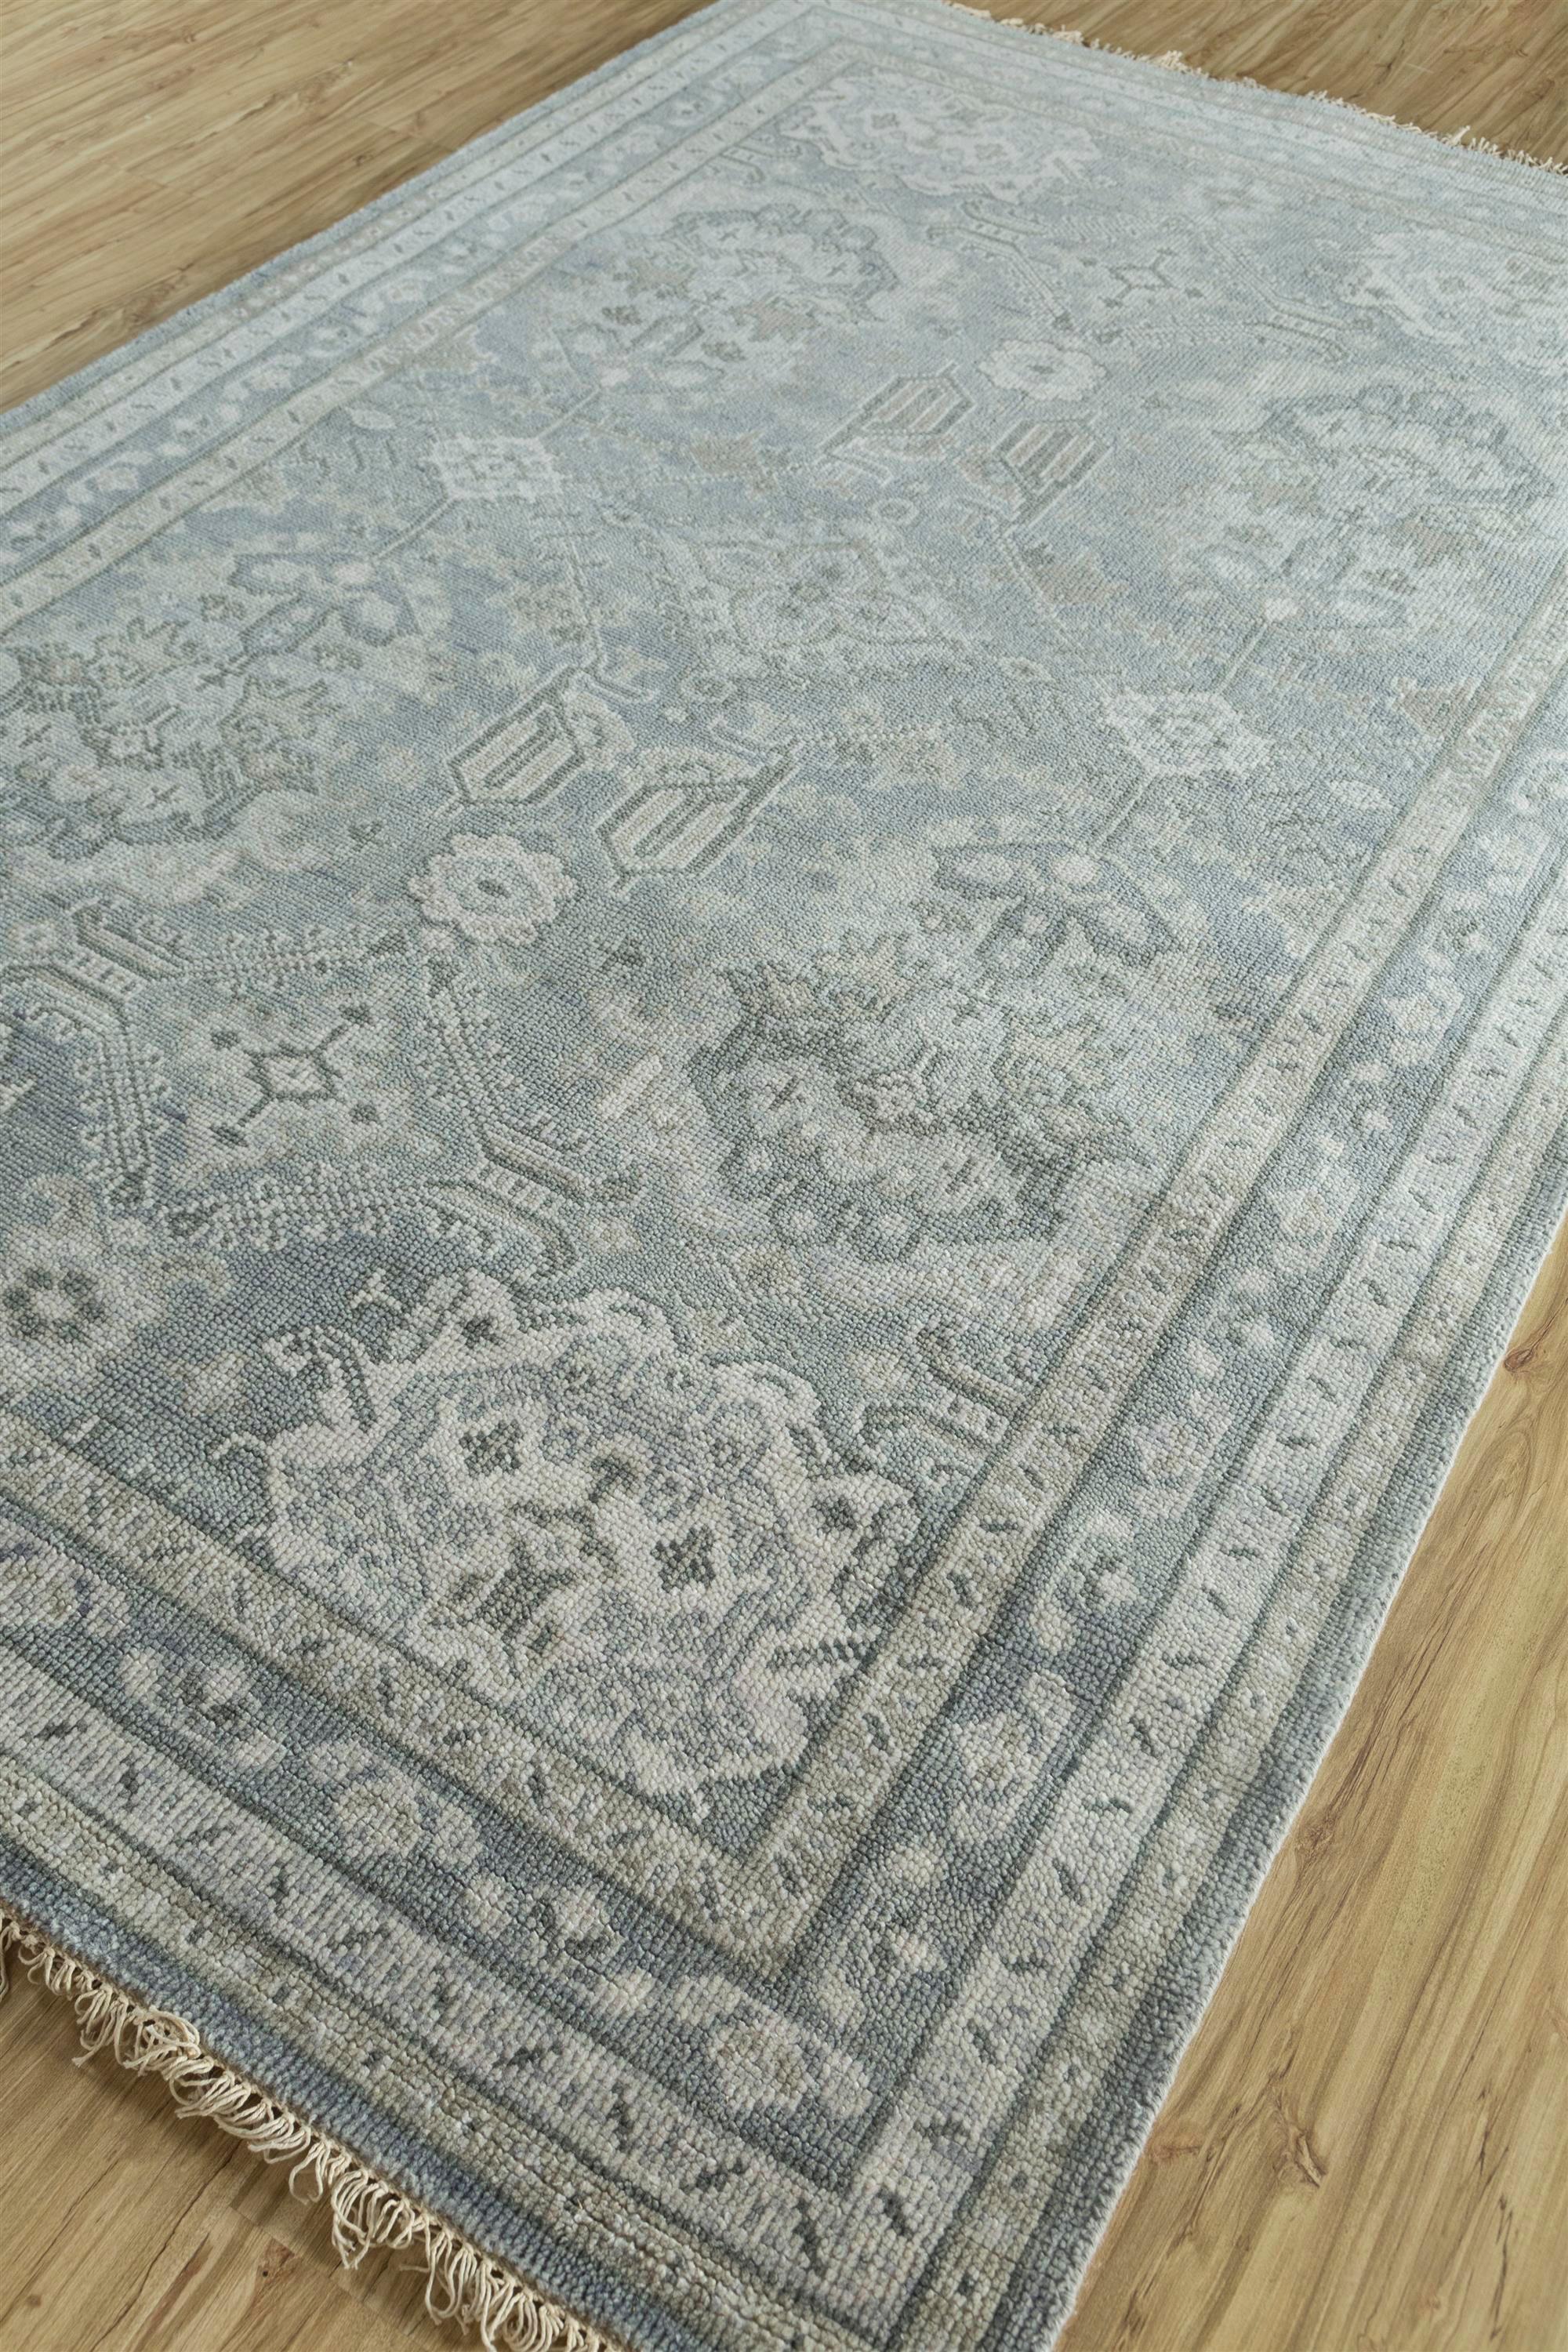 Indian Icy Medley Glacier Gray & BlueBell 200X300 Cm Handknotted Rug For Sale